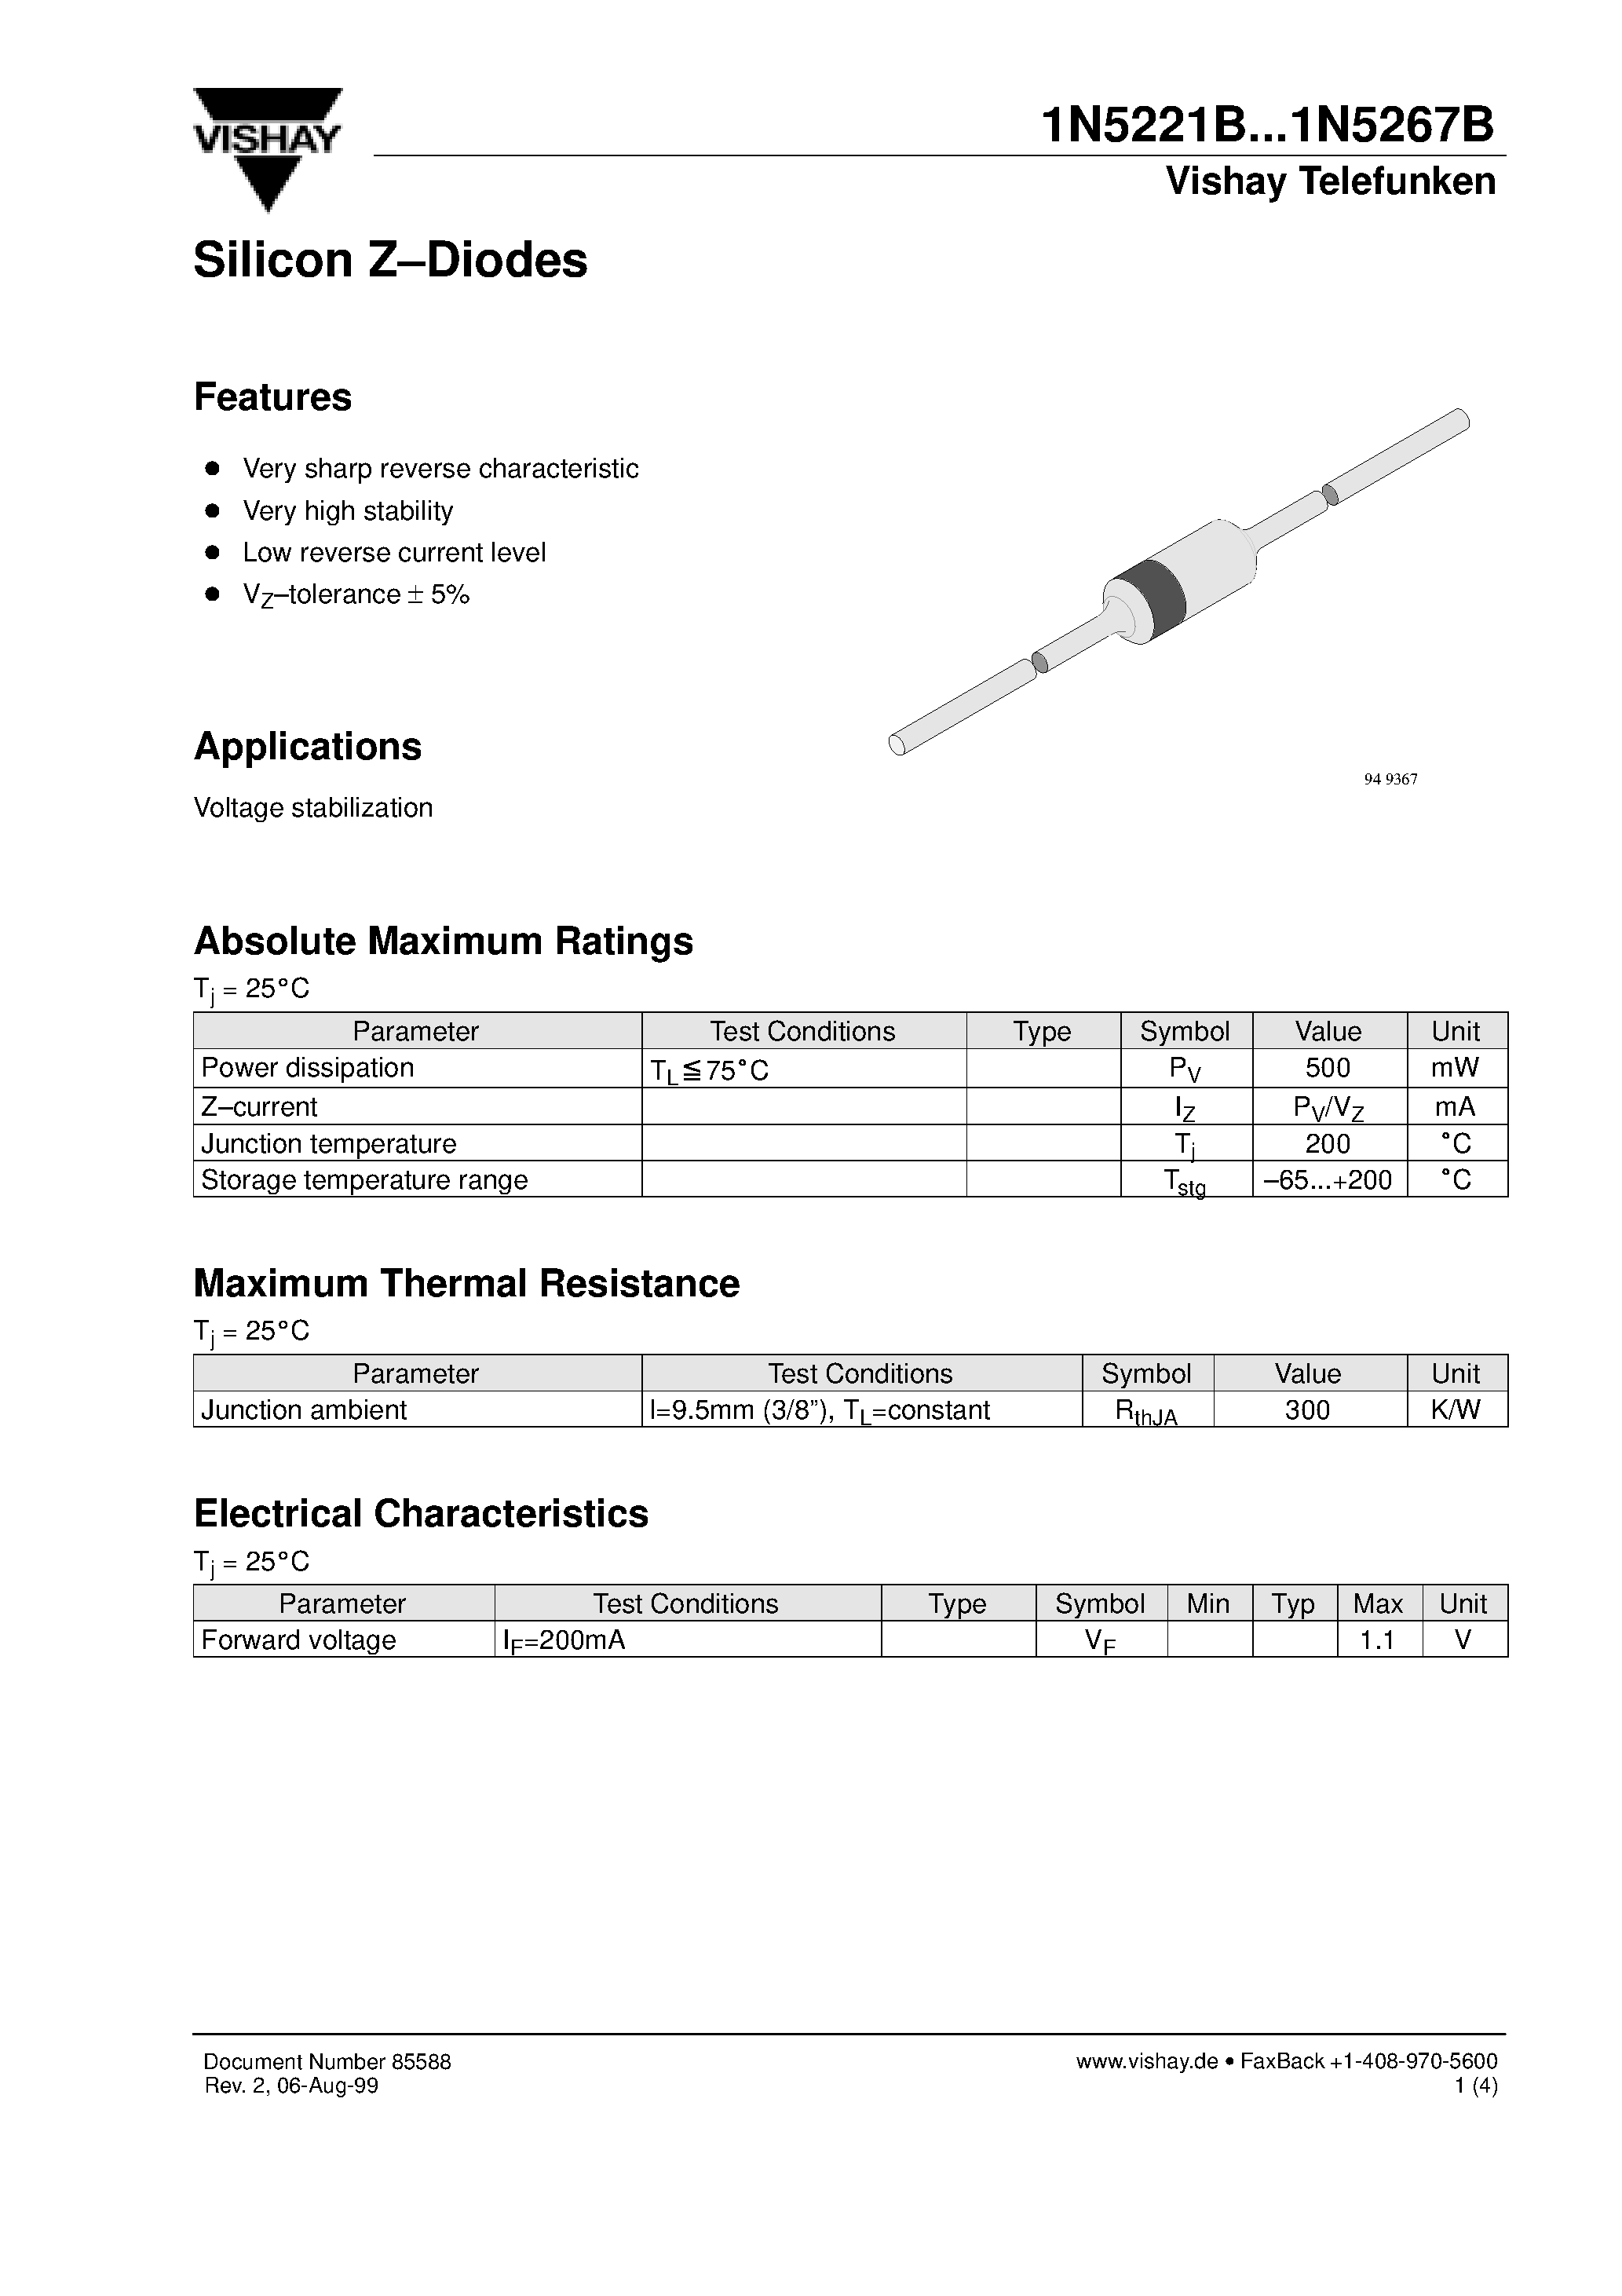 Datasheet 1N5245B - Silicon Z-Diodes page 1